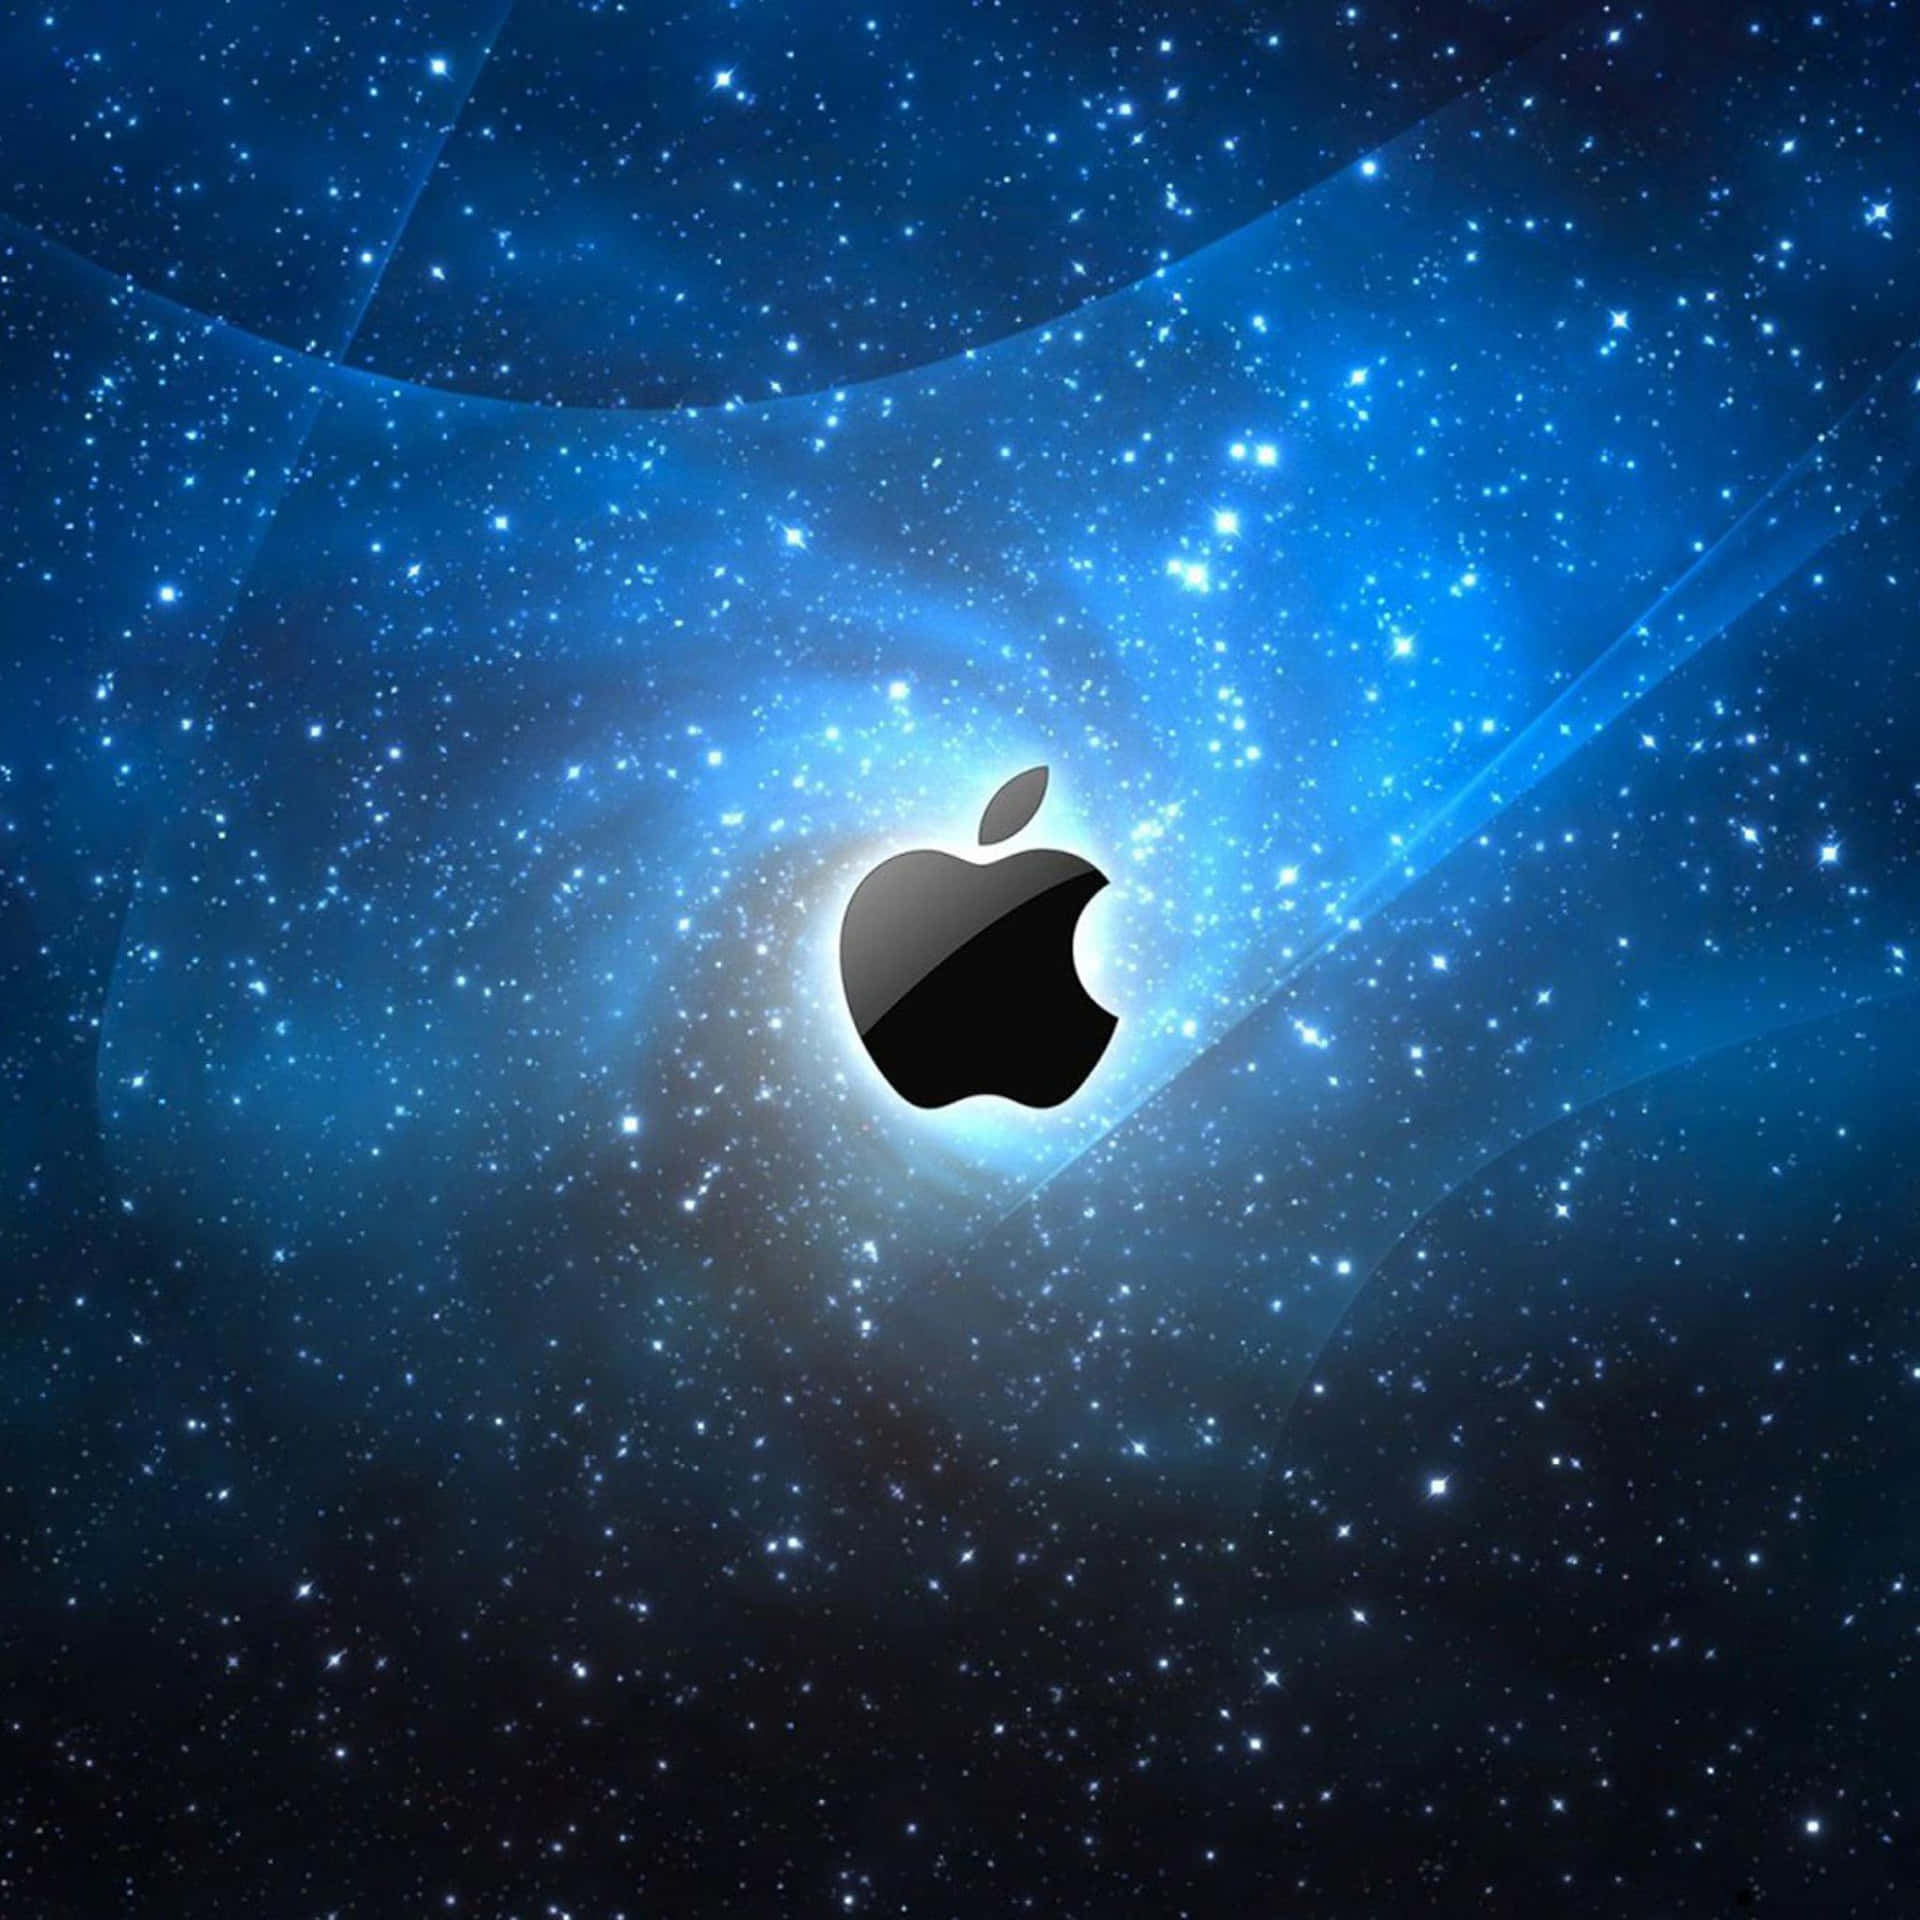 Ipad Air 2 Pictures Wallpaper